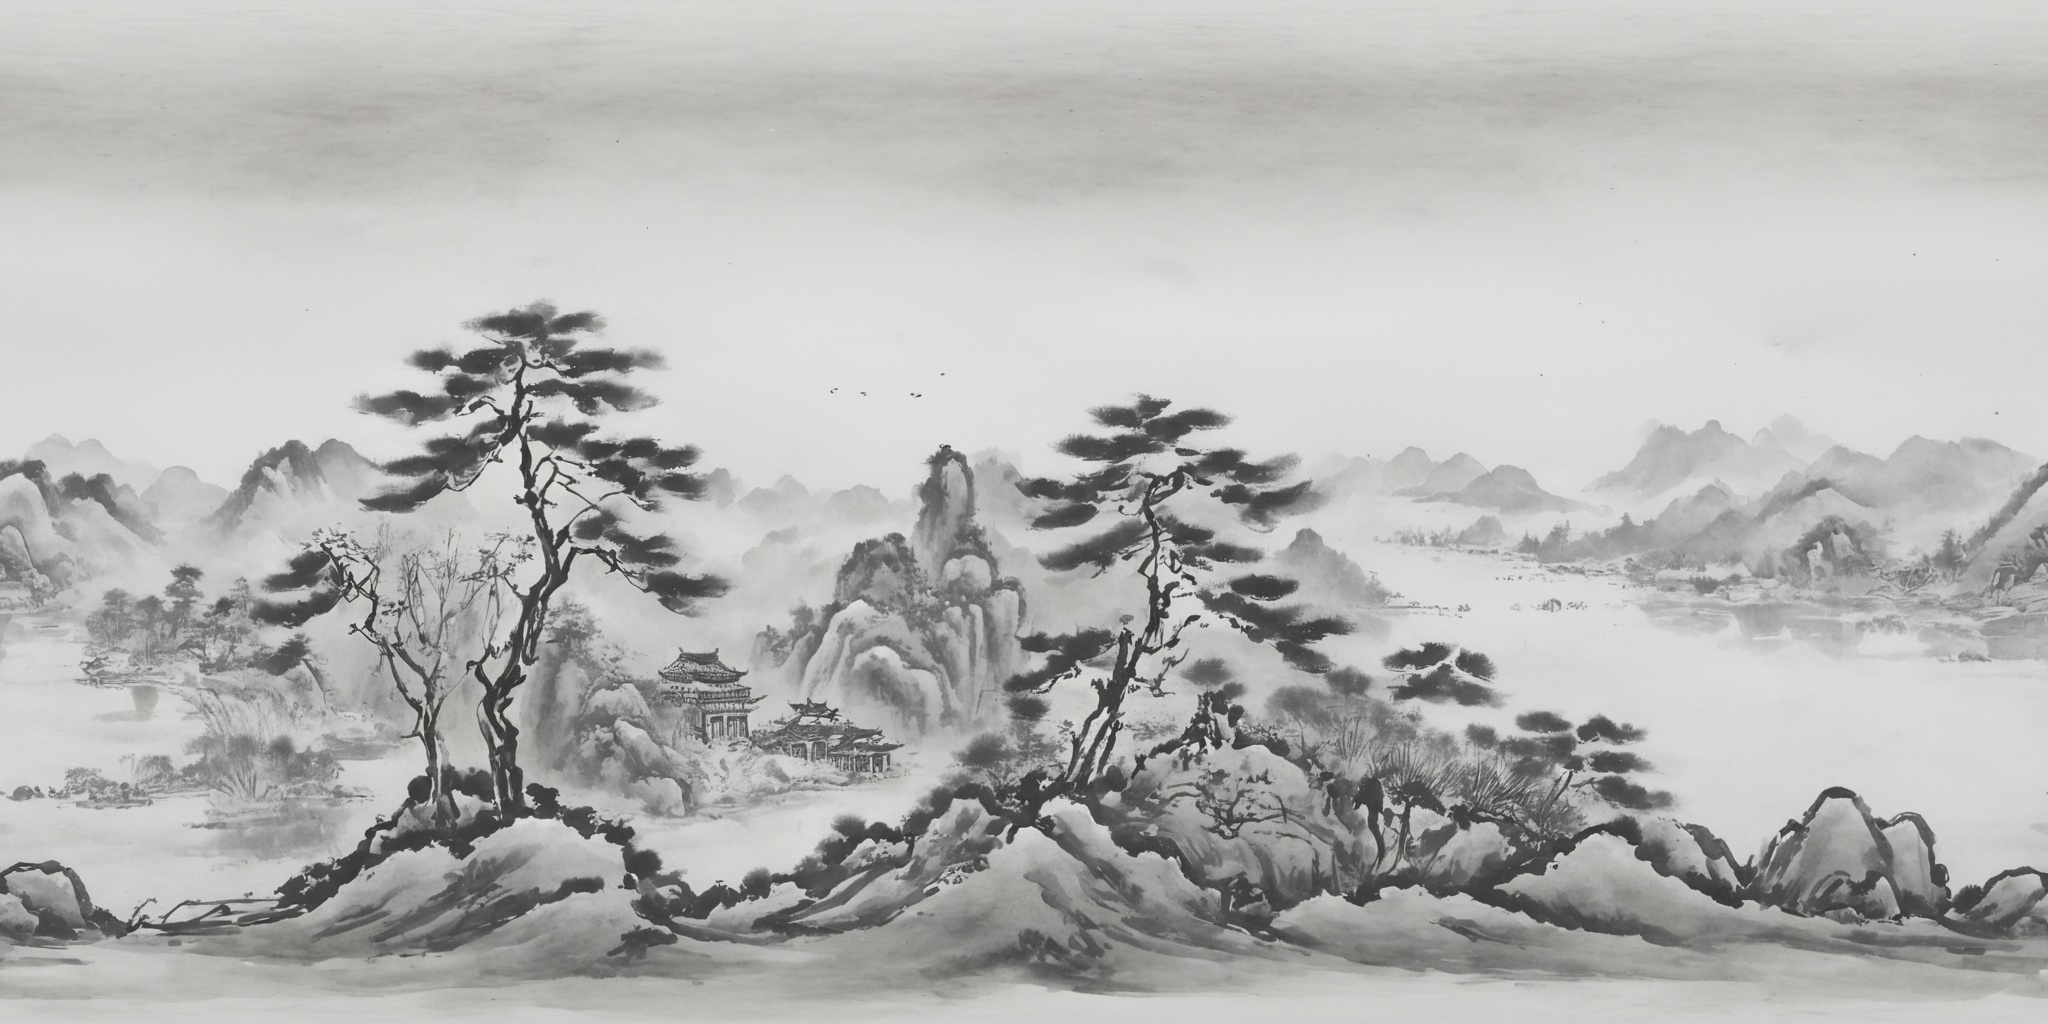 360panorama,<lora:山水-000001:1.2>,(sphere panorama:1.5),<lora:HMSG360全景XL-V1.0:0.8>,Chinese landscape,ink wash painting,monochrome,spherical panorama,white margins top and bottom,tranquil traditional scenery,serene mountains and rivers,classical pavilions,misty atmosphere,ink on rice paper effect,digital ink,subtle ink gradations,ultra-high resolution,pure natural beauty,ancient charm,360-degree panoramic view,harmonious natural elements,without modern elements,